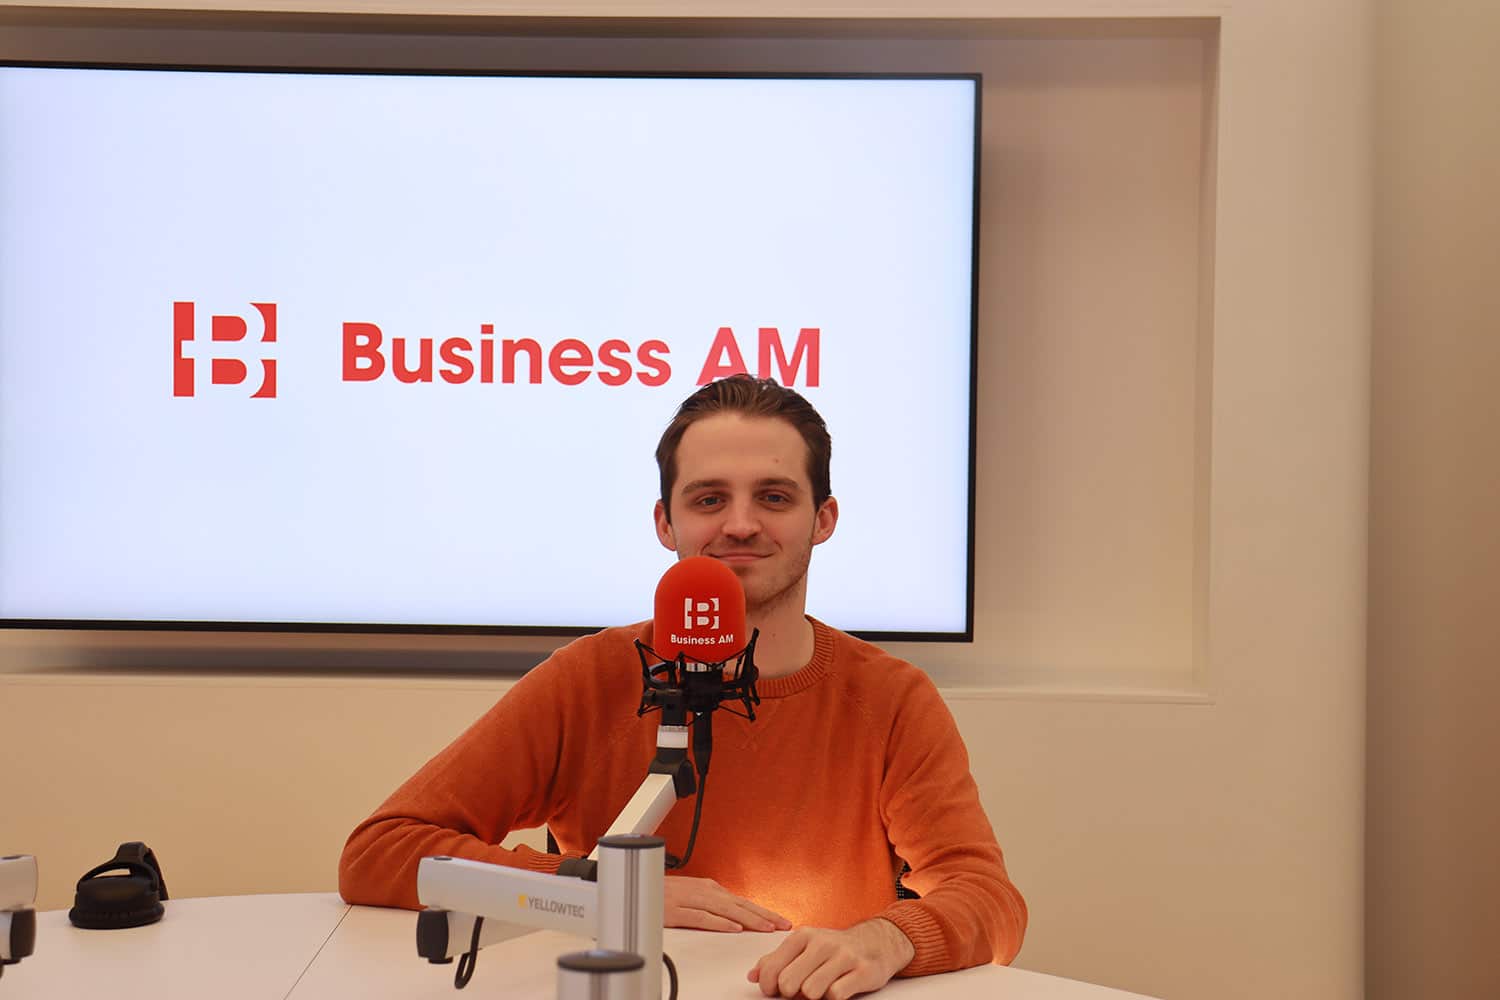 Dennis Janssen kicked off Business AM radio on January 9 with “The Morning Drive.”